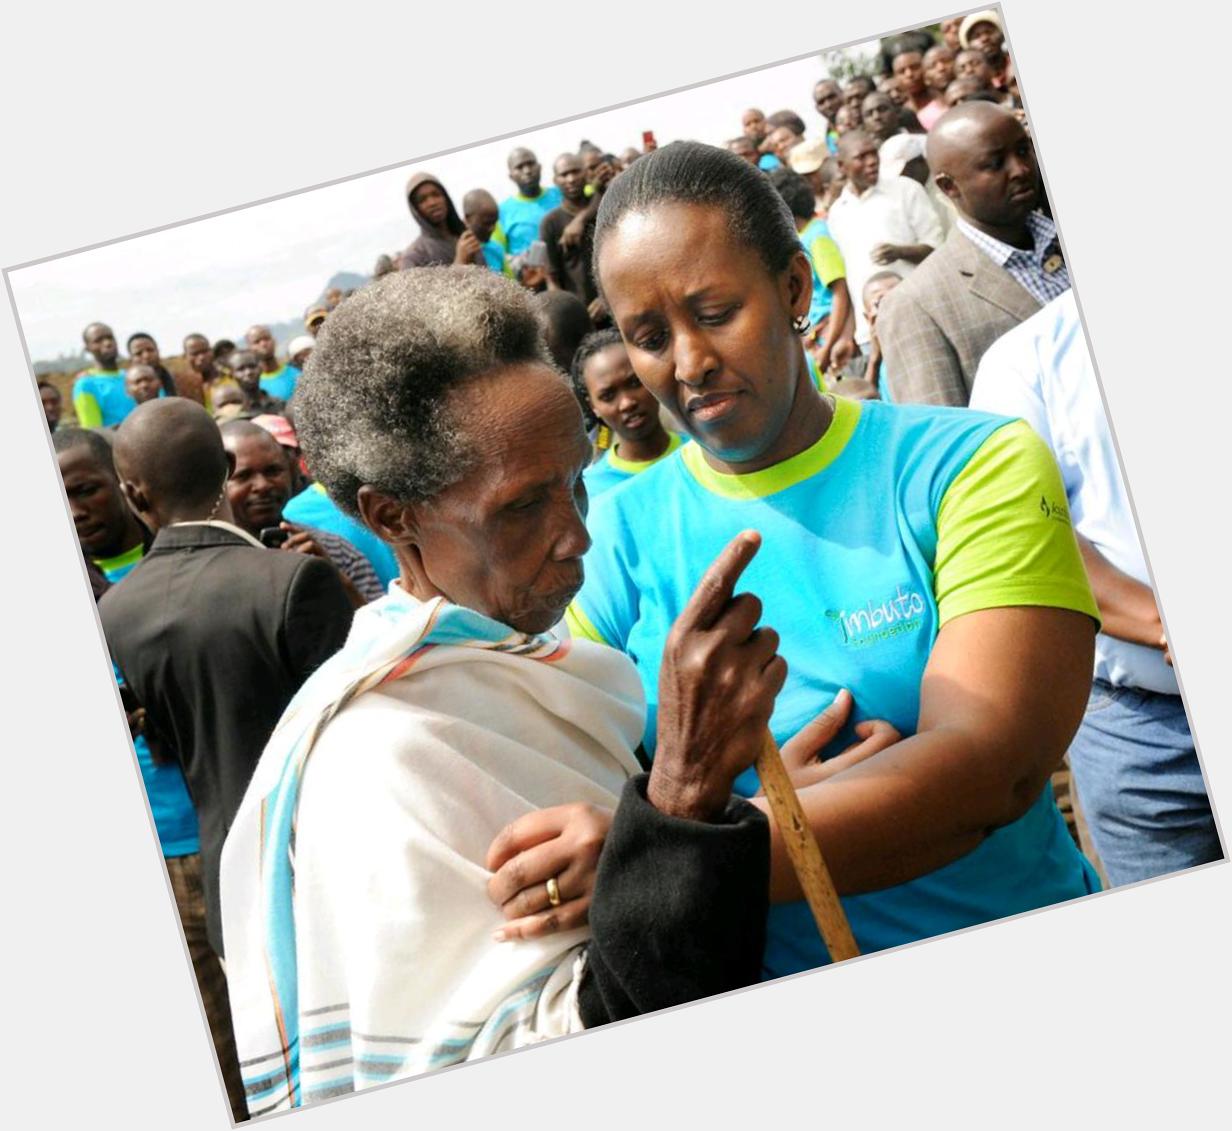 Wishing Jeannette Kagame, a very happy birthday! You inspire us with your compassion & vision. 